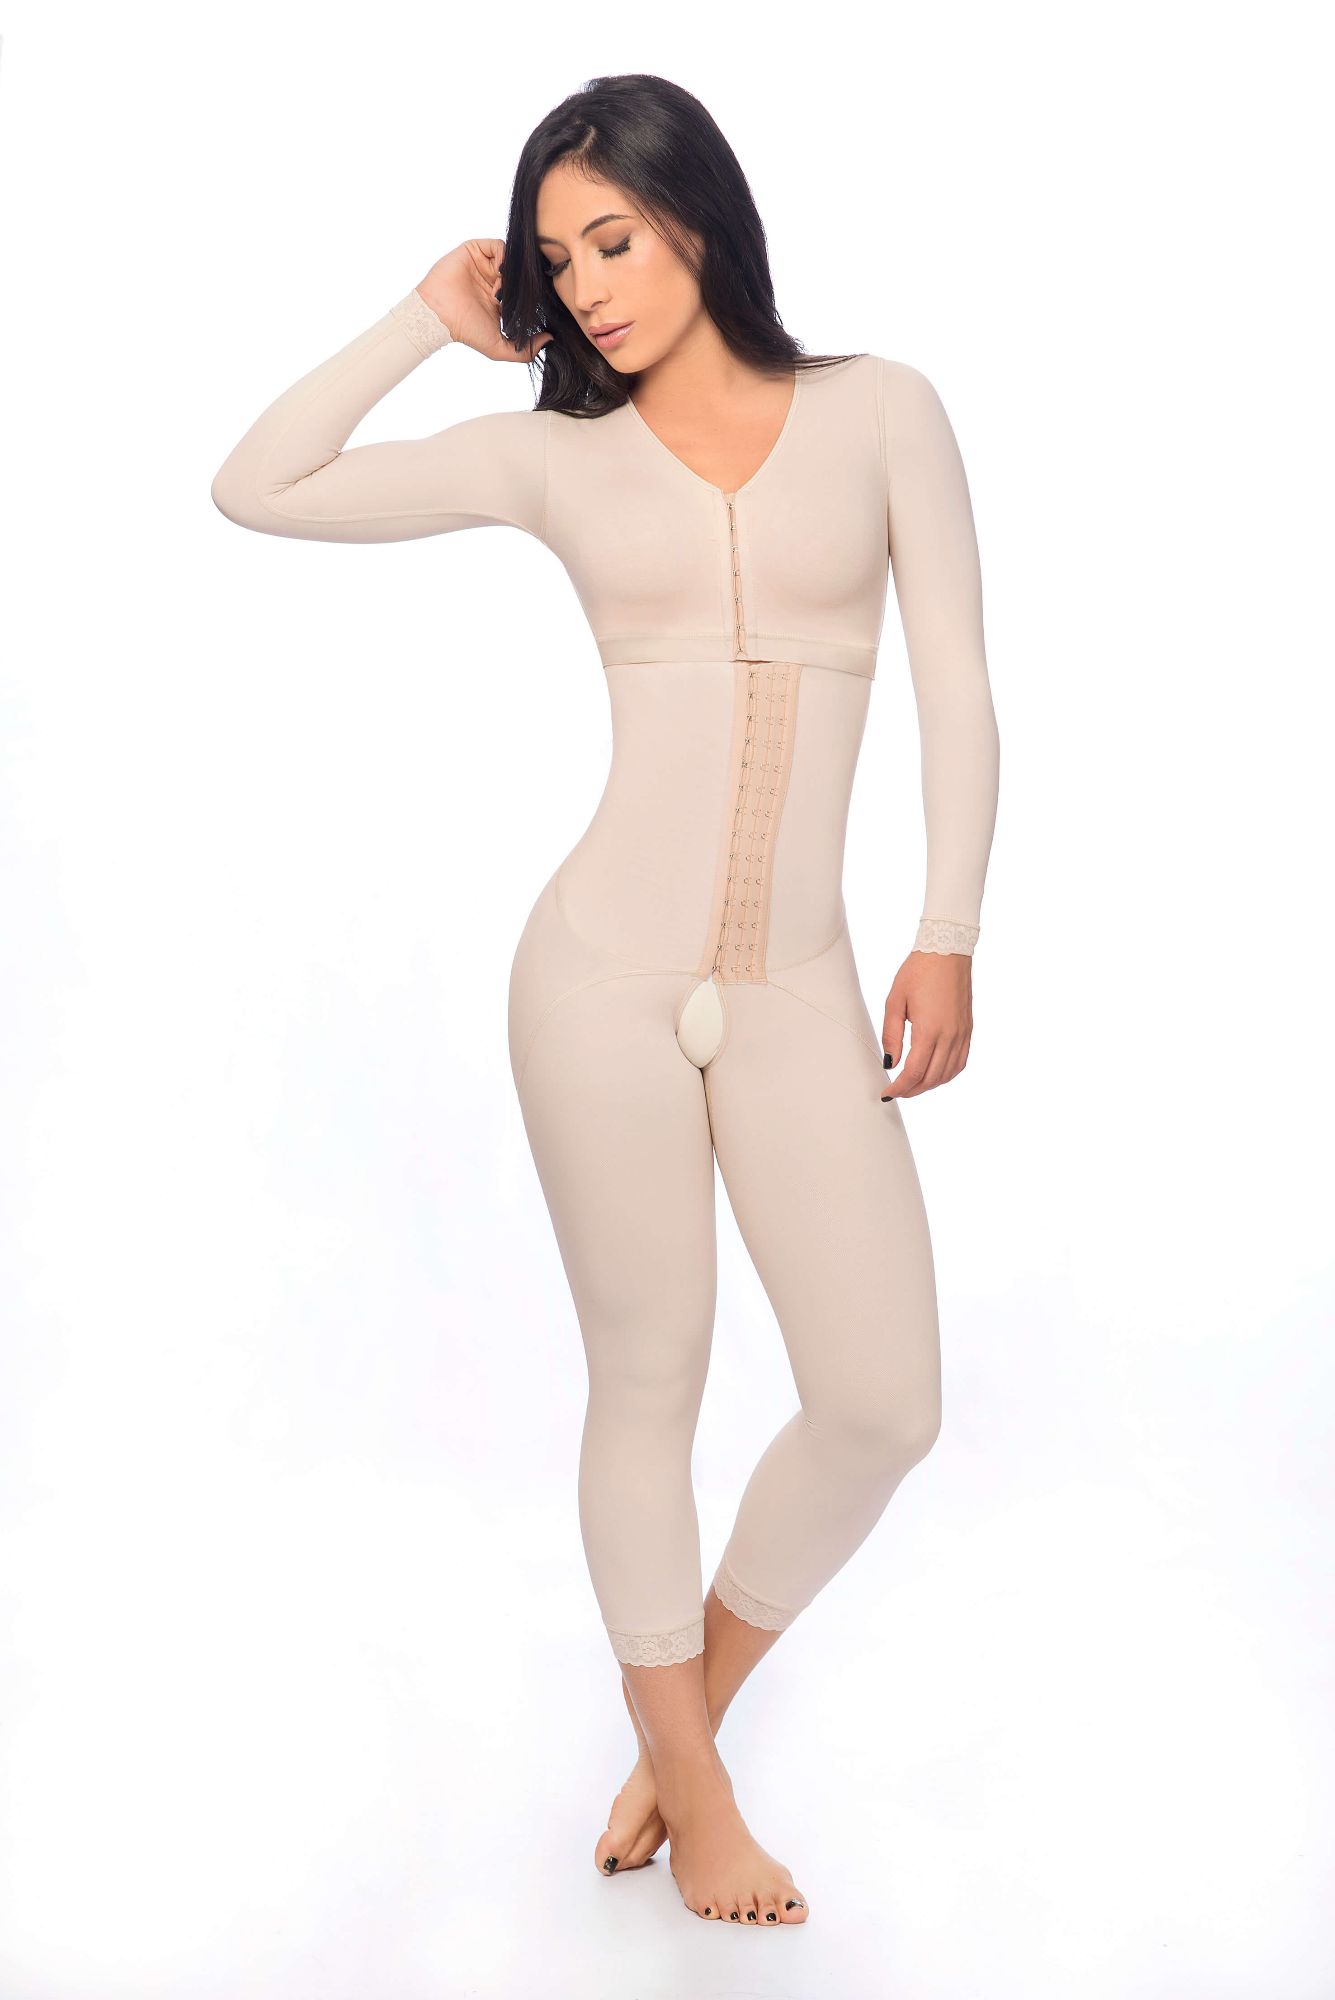 Full body under knee faja with sleeves and hook closure - Contour